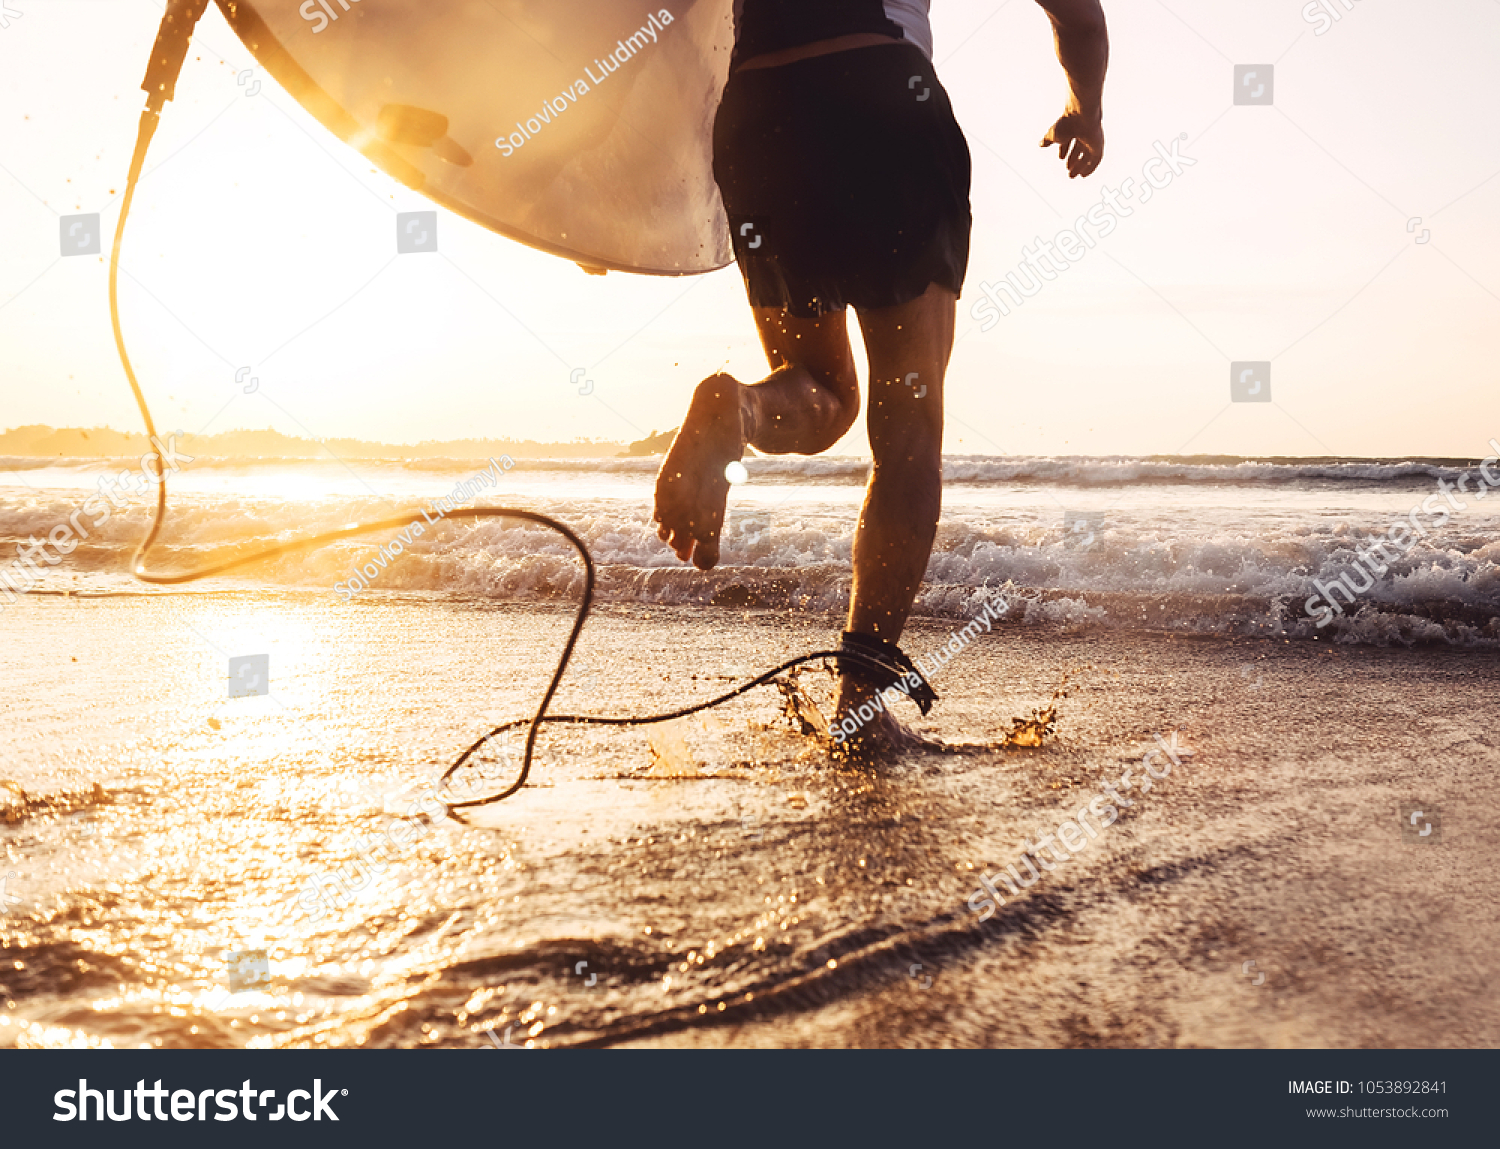 Man surfer run in ocean with surfboard. Active vacation, health lifestyle and sport concept image #1053892841